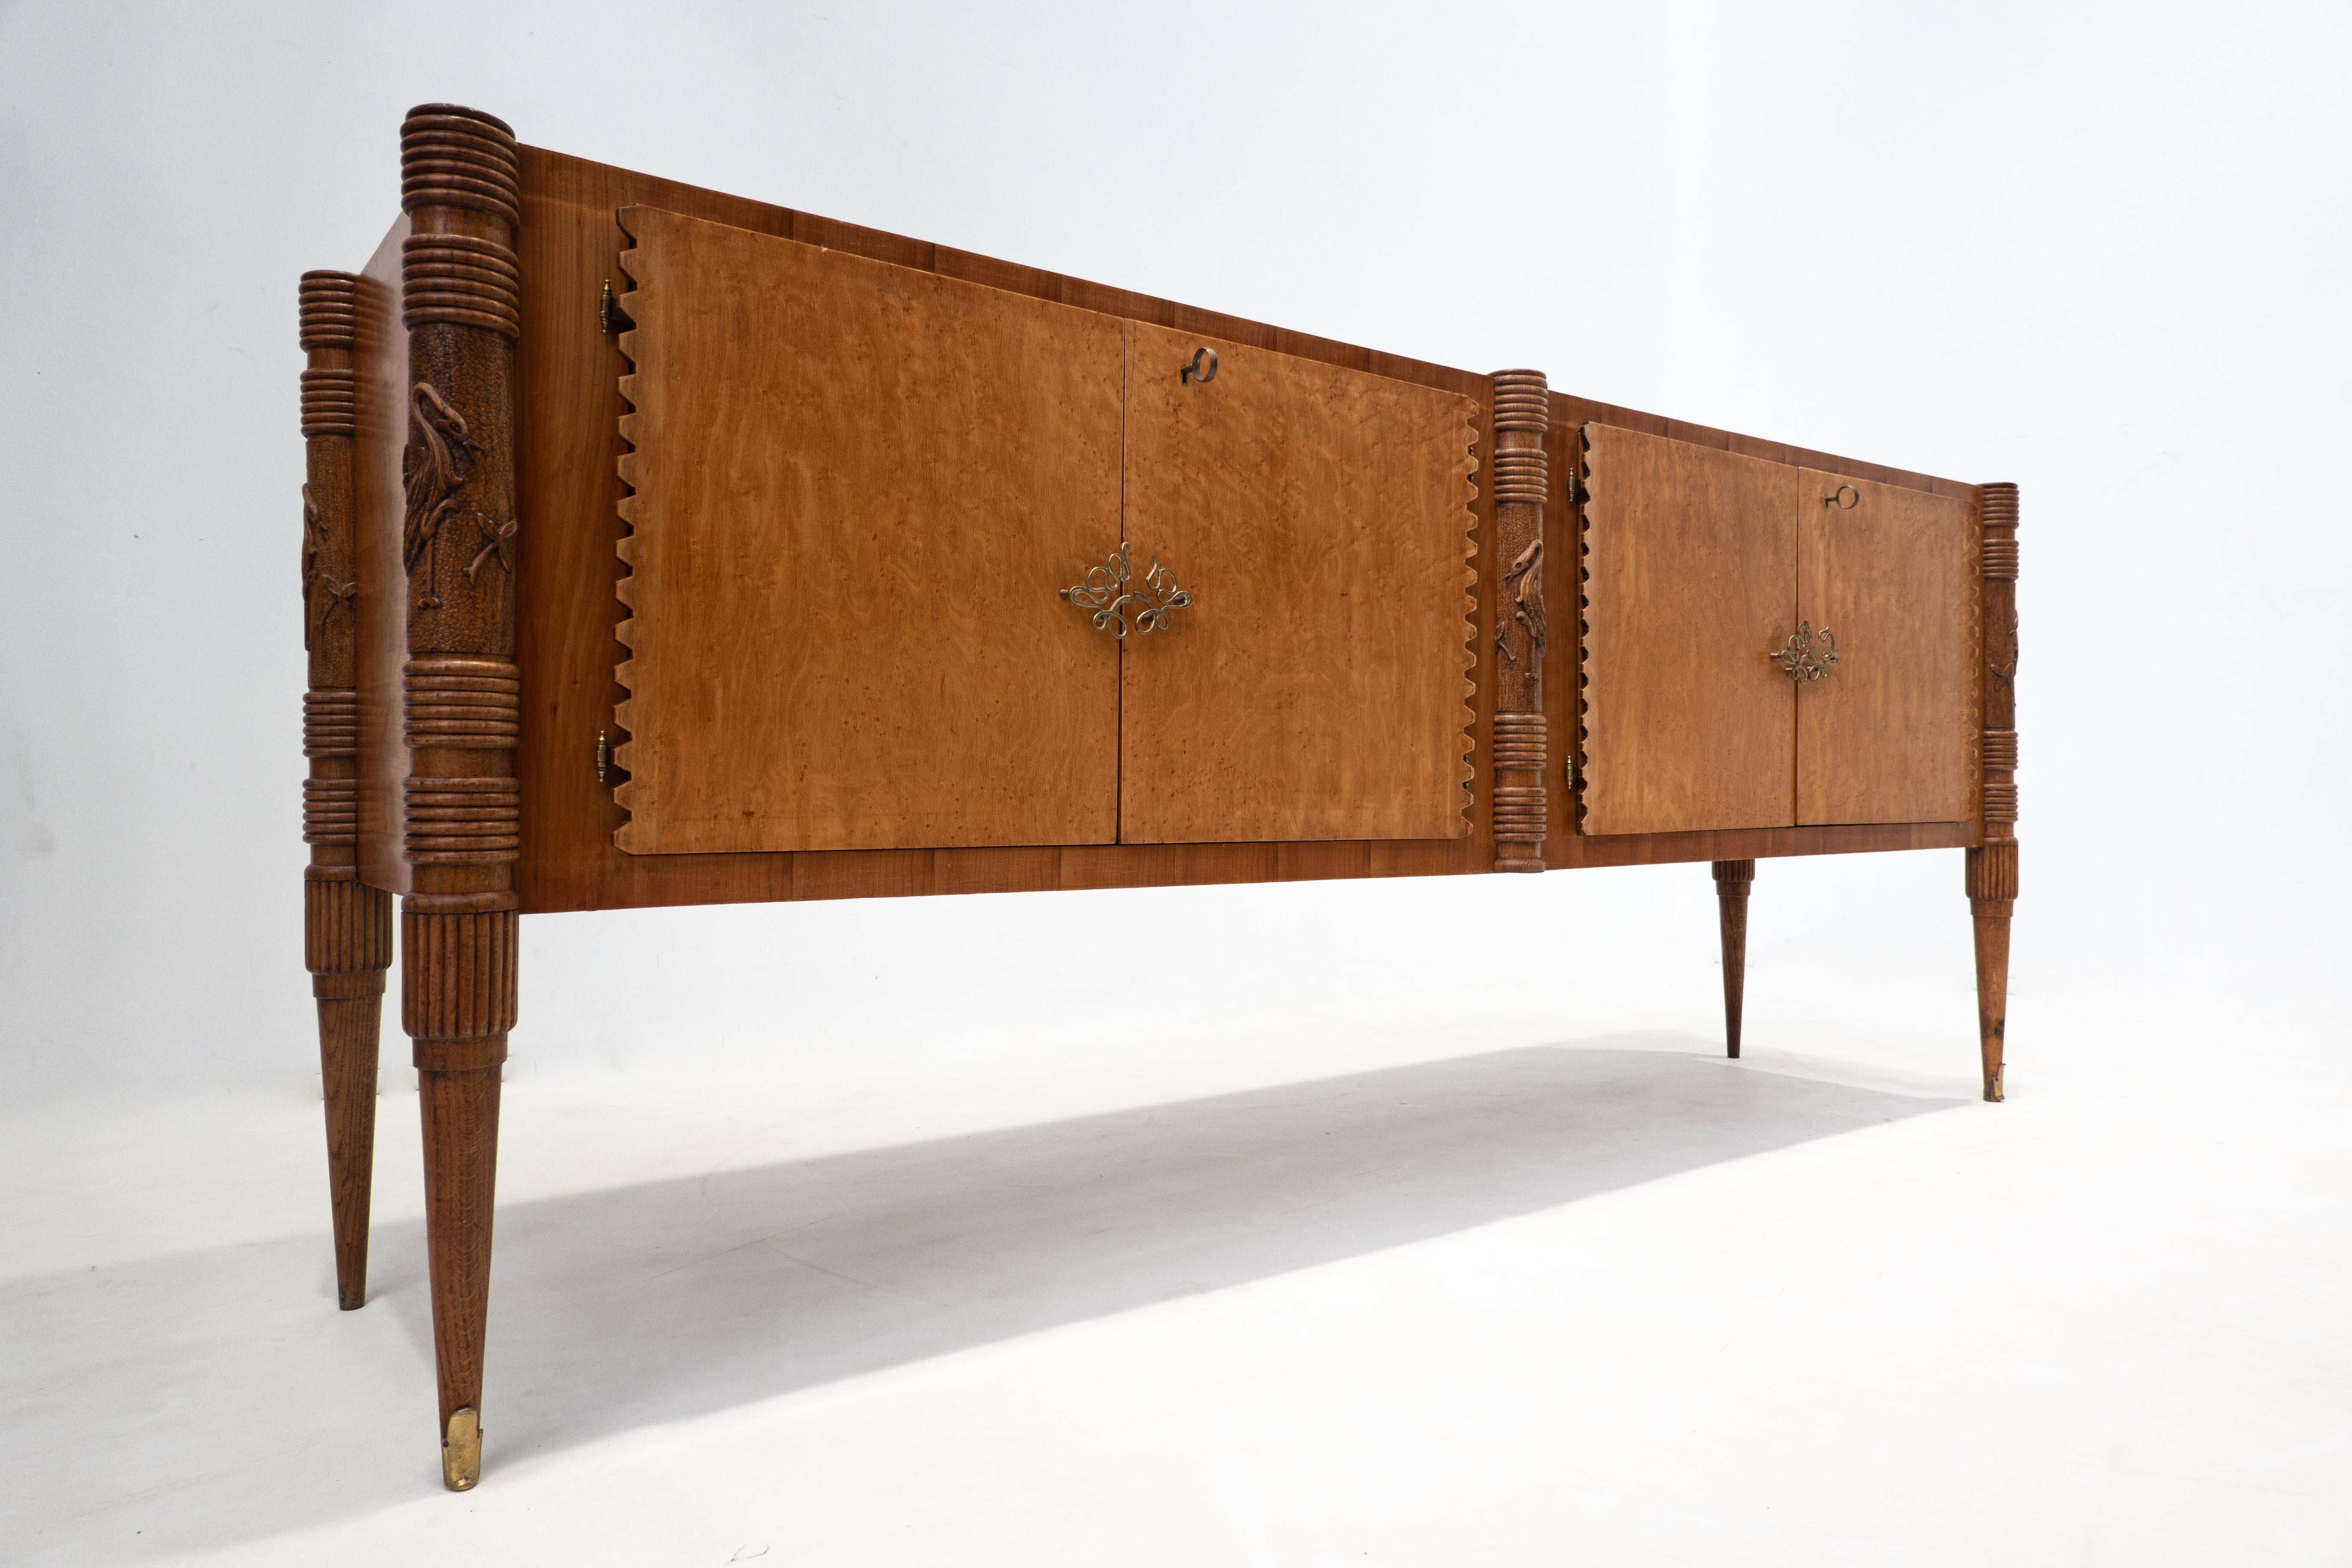 Large Italian wooden sideboard by Pier Luigi Colli with four doors, 1940s.